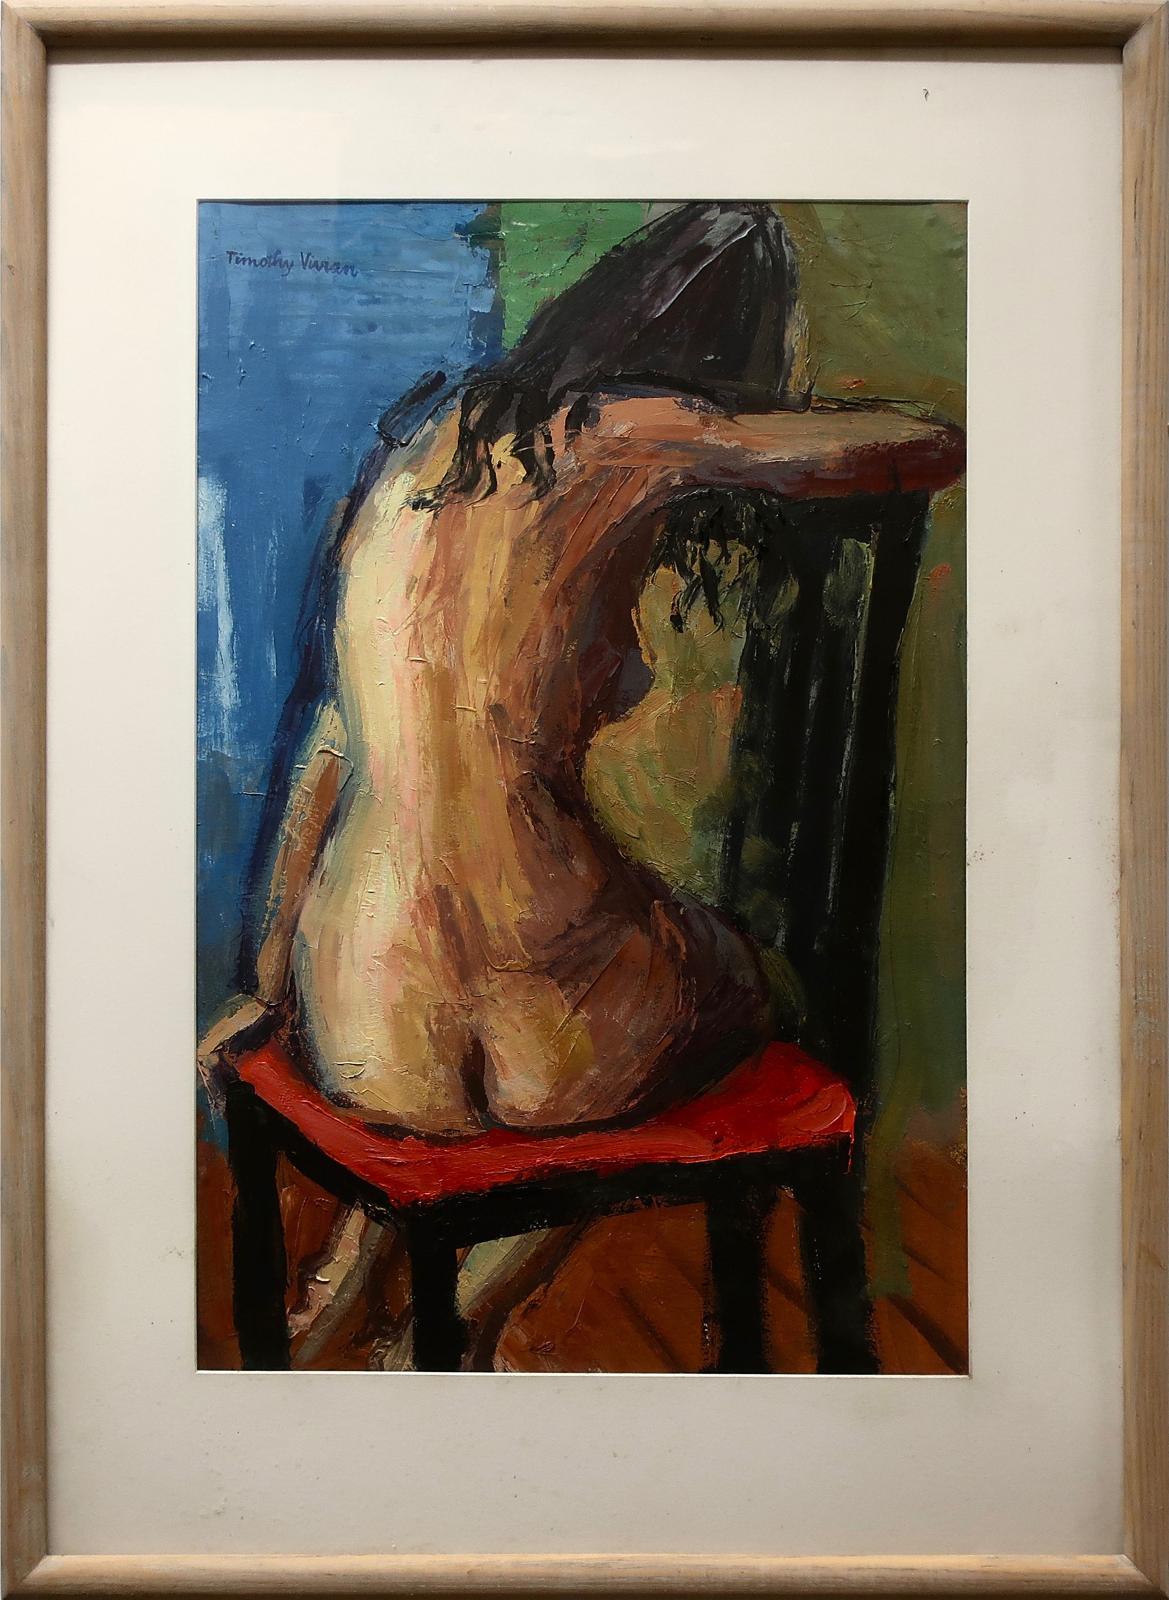 Timothy Vivian (1926-2018) - Nude On Upright Chair